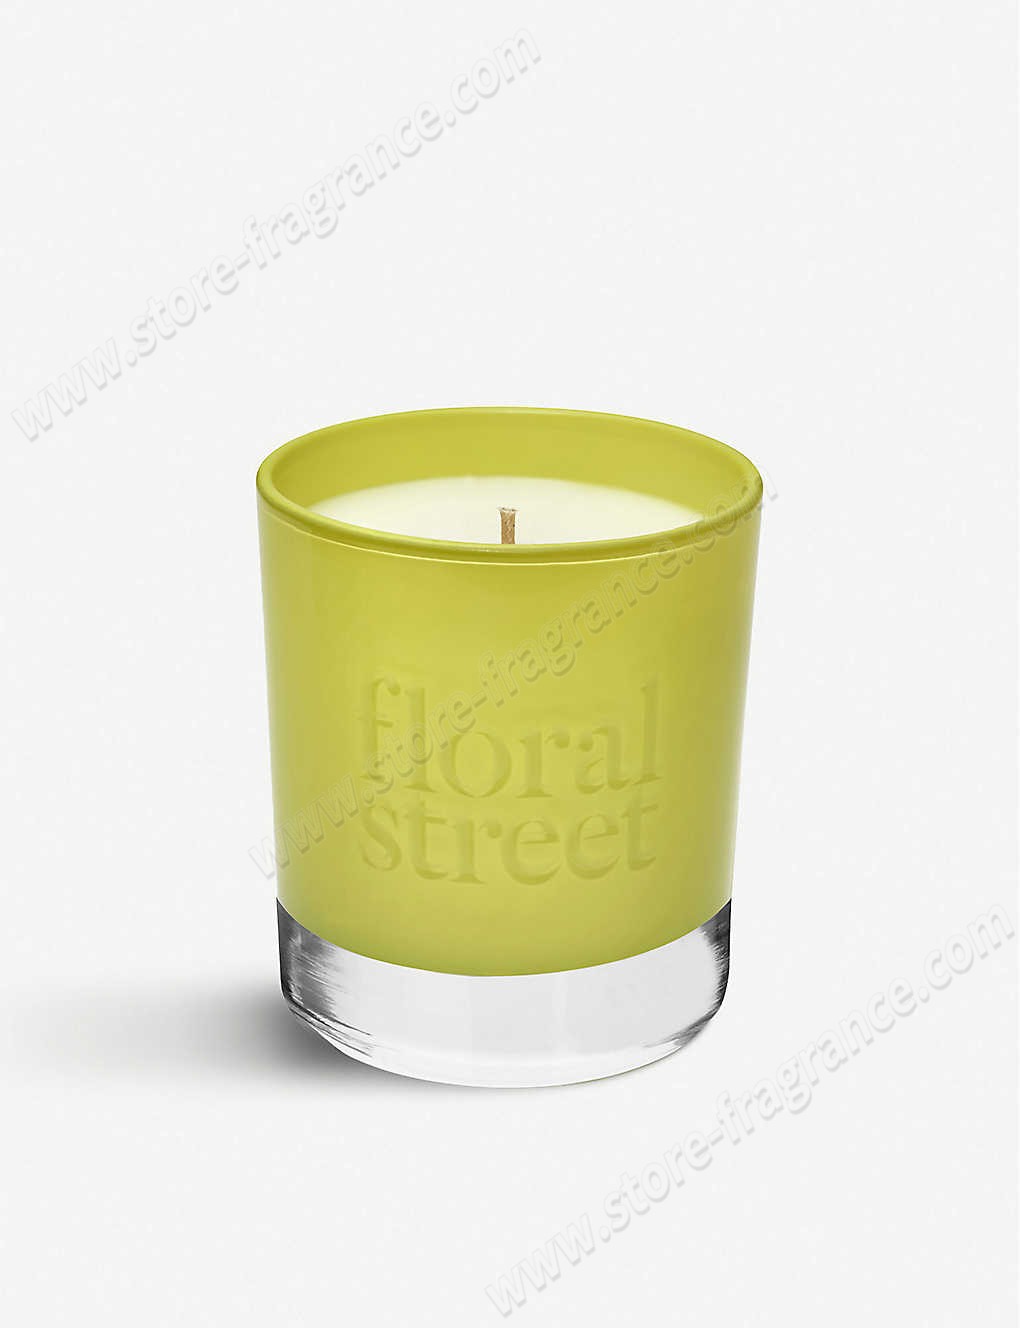 FLORAL STREET/Spring Bouquet scented candle 200g ✿ Discount Store - -0